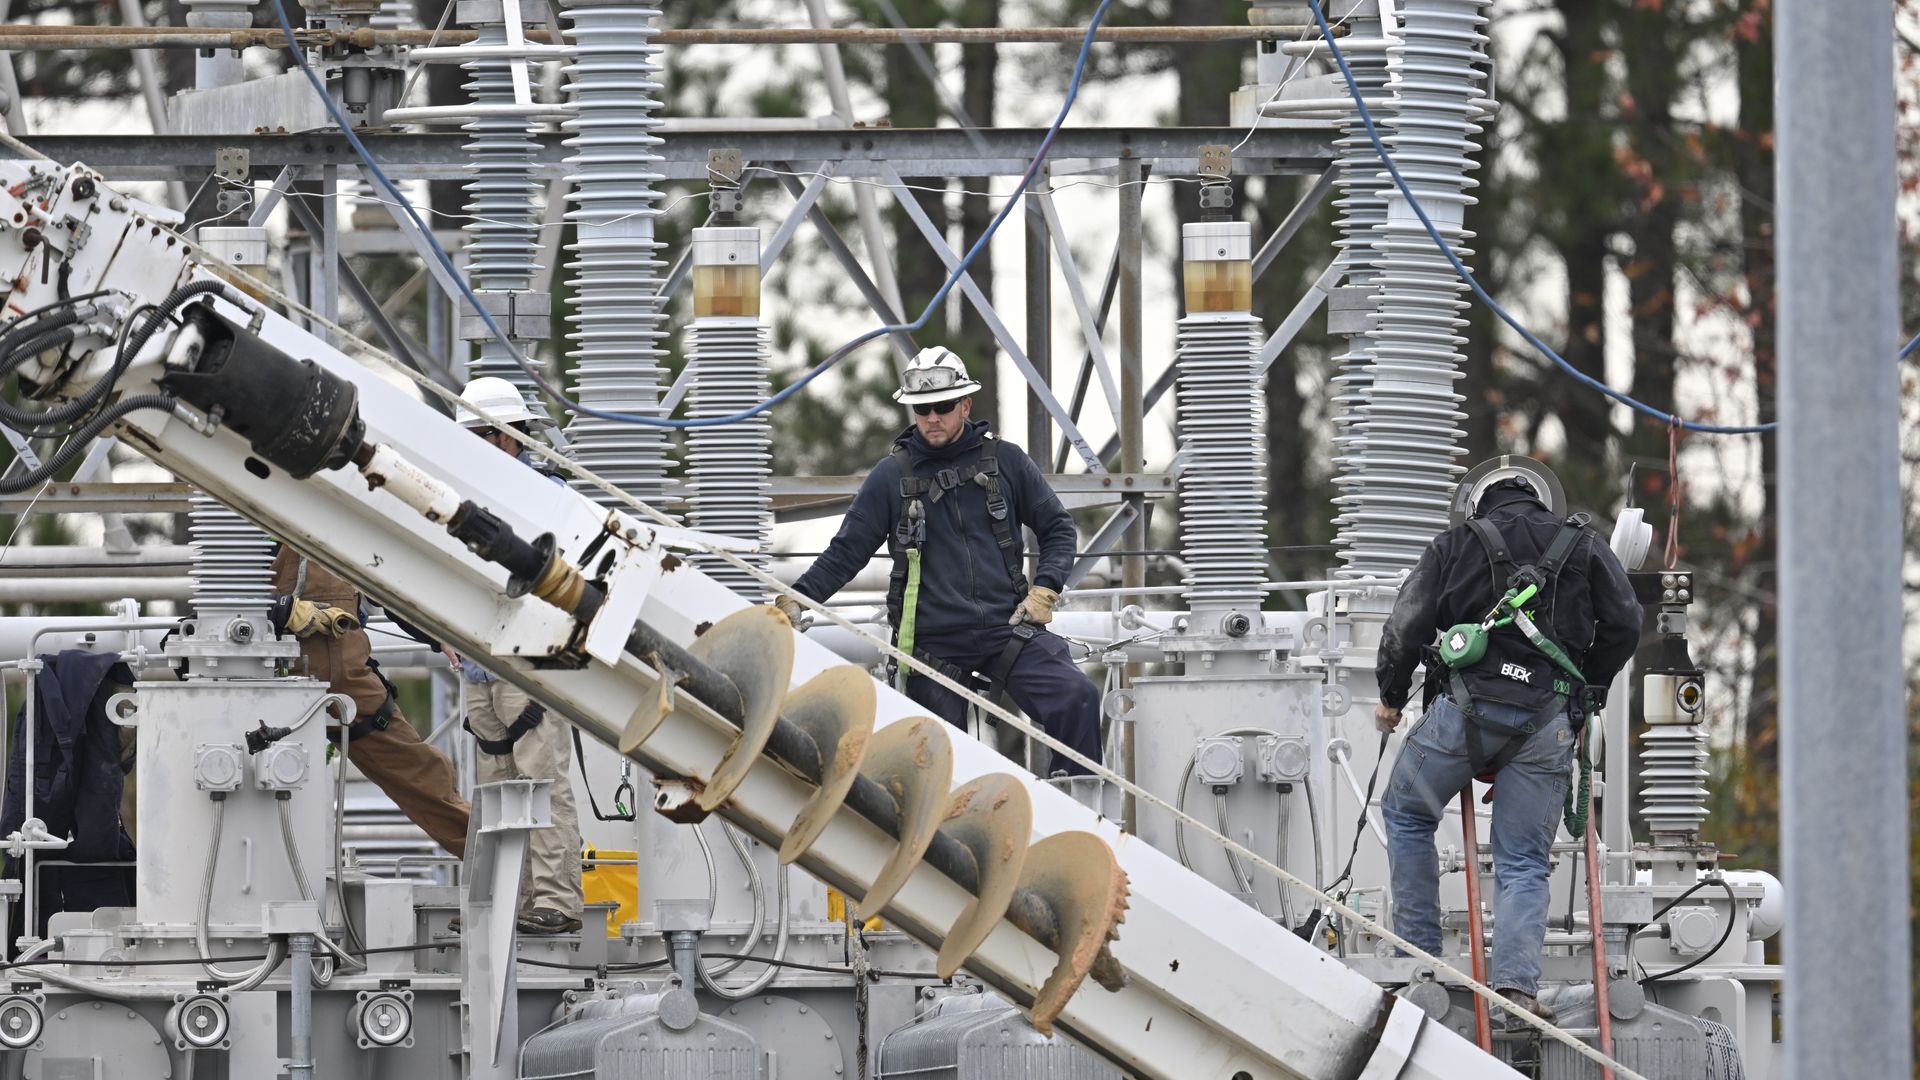 Workers at a substation in Carthage, North Carolina, on Dec. 5.